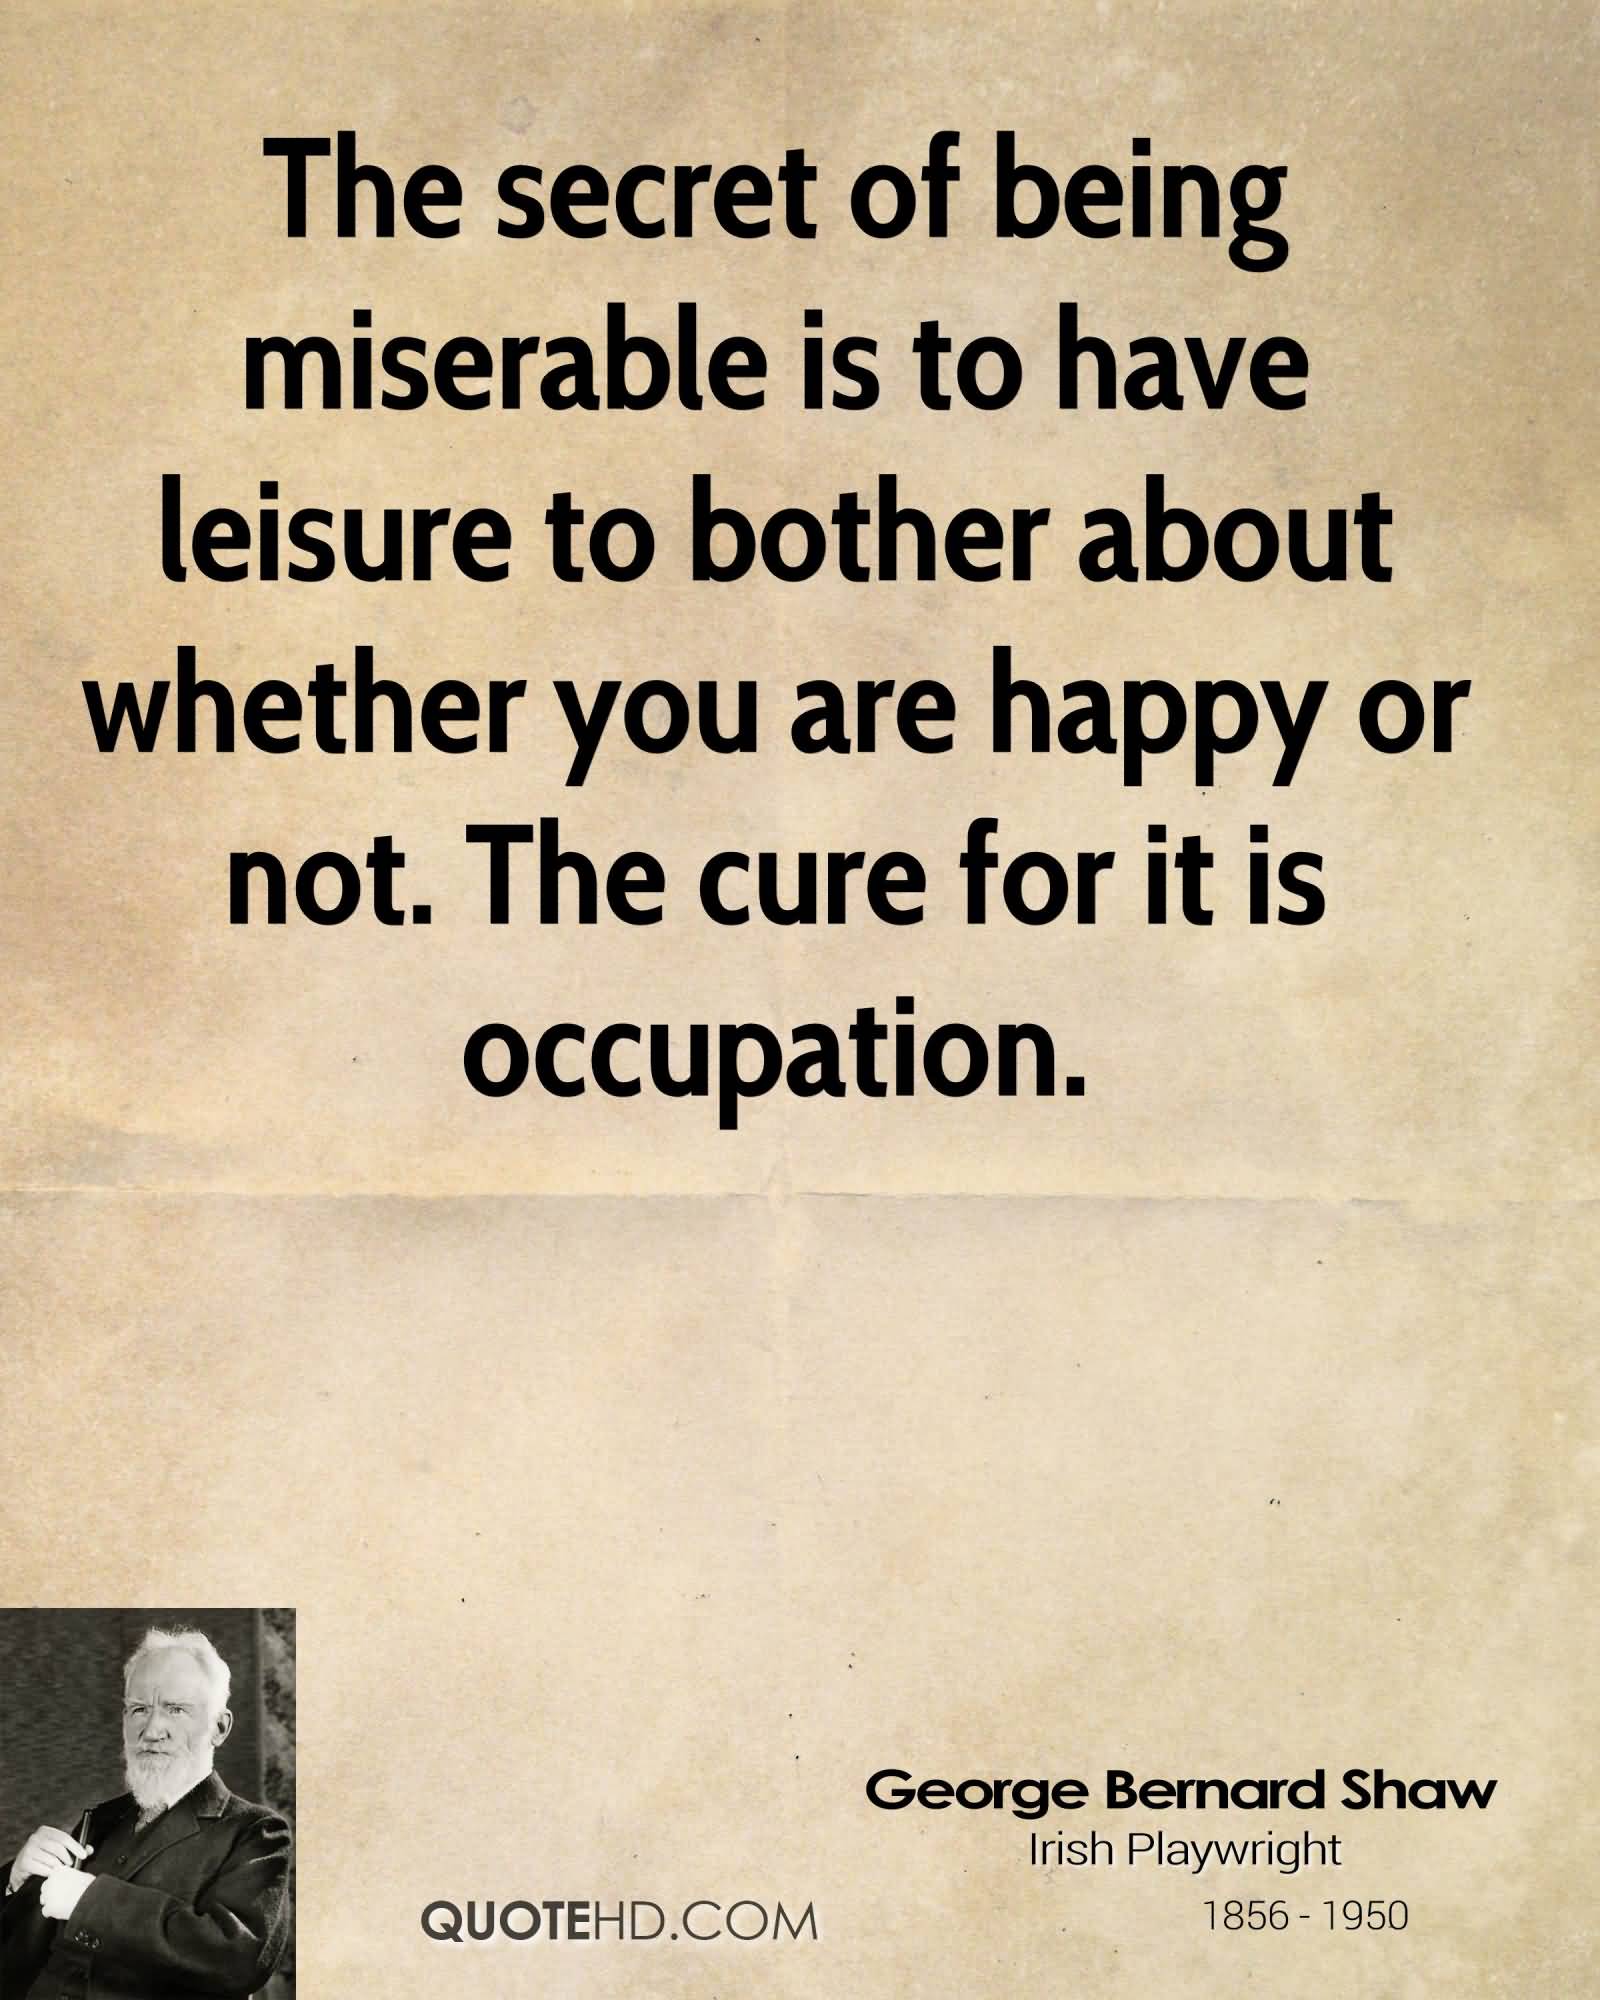 The secret of being miserable is to have leisure to bother about whether you are happy or not. The cure for it is occupation. George Bernard Shaw